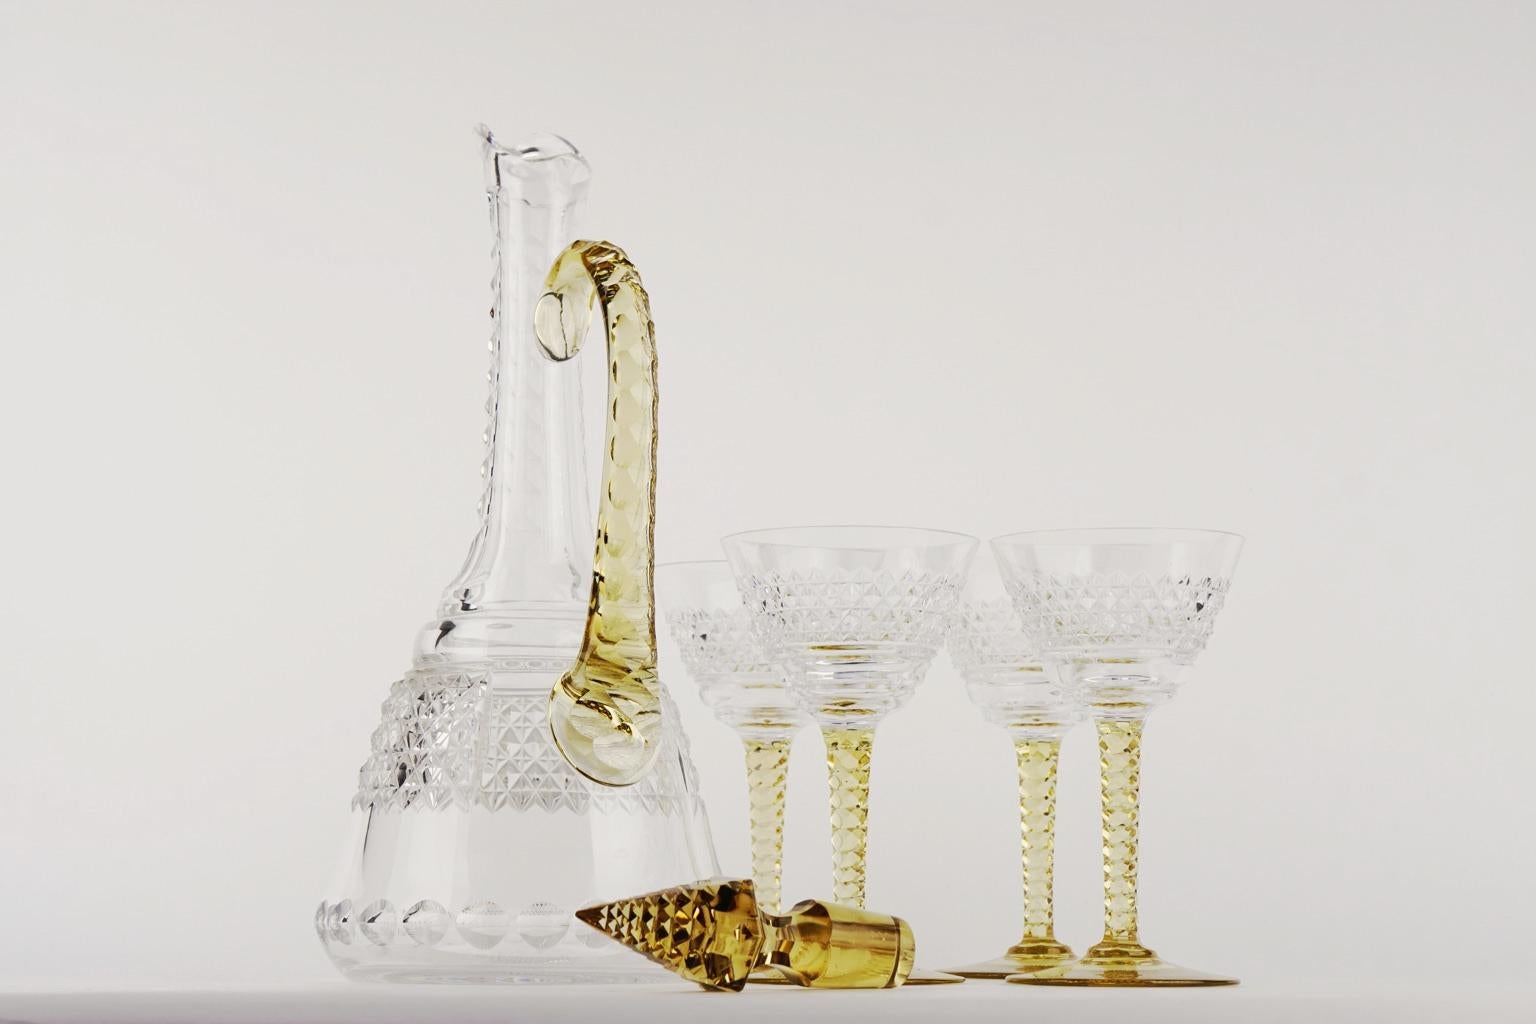 Art Deco Crystal Topaz and White Liquor Service Decanter and Glasses For Sale 3